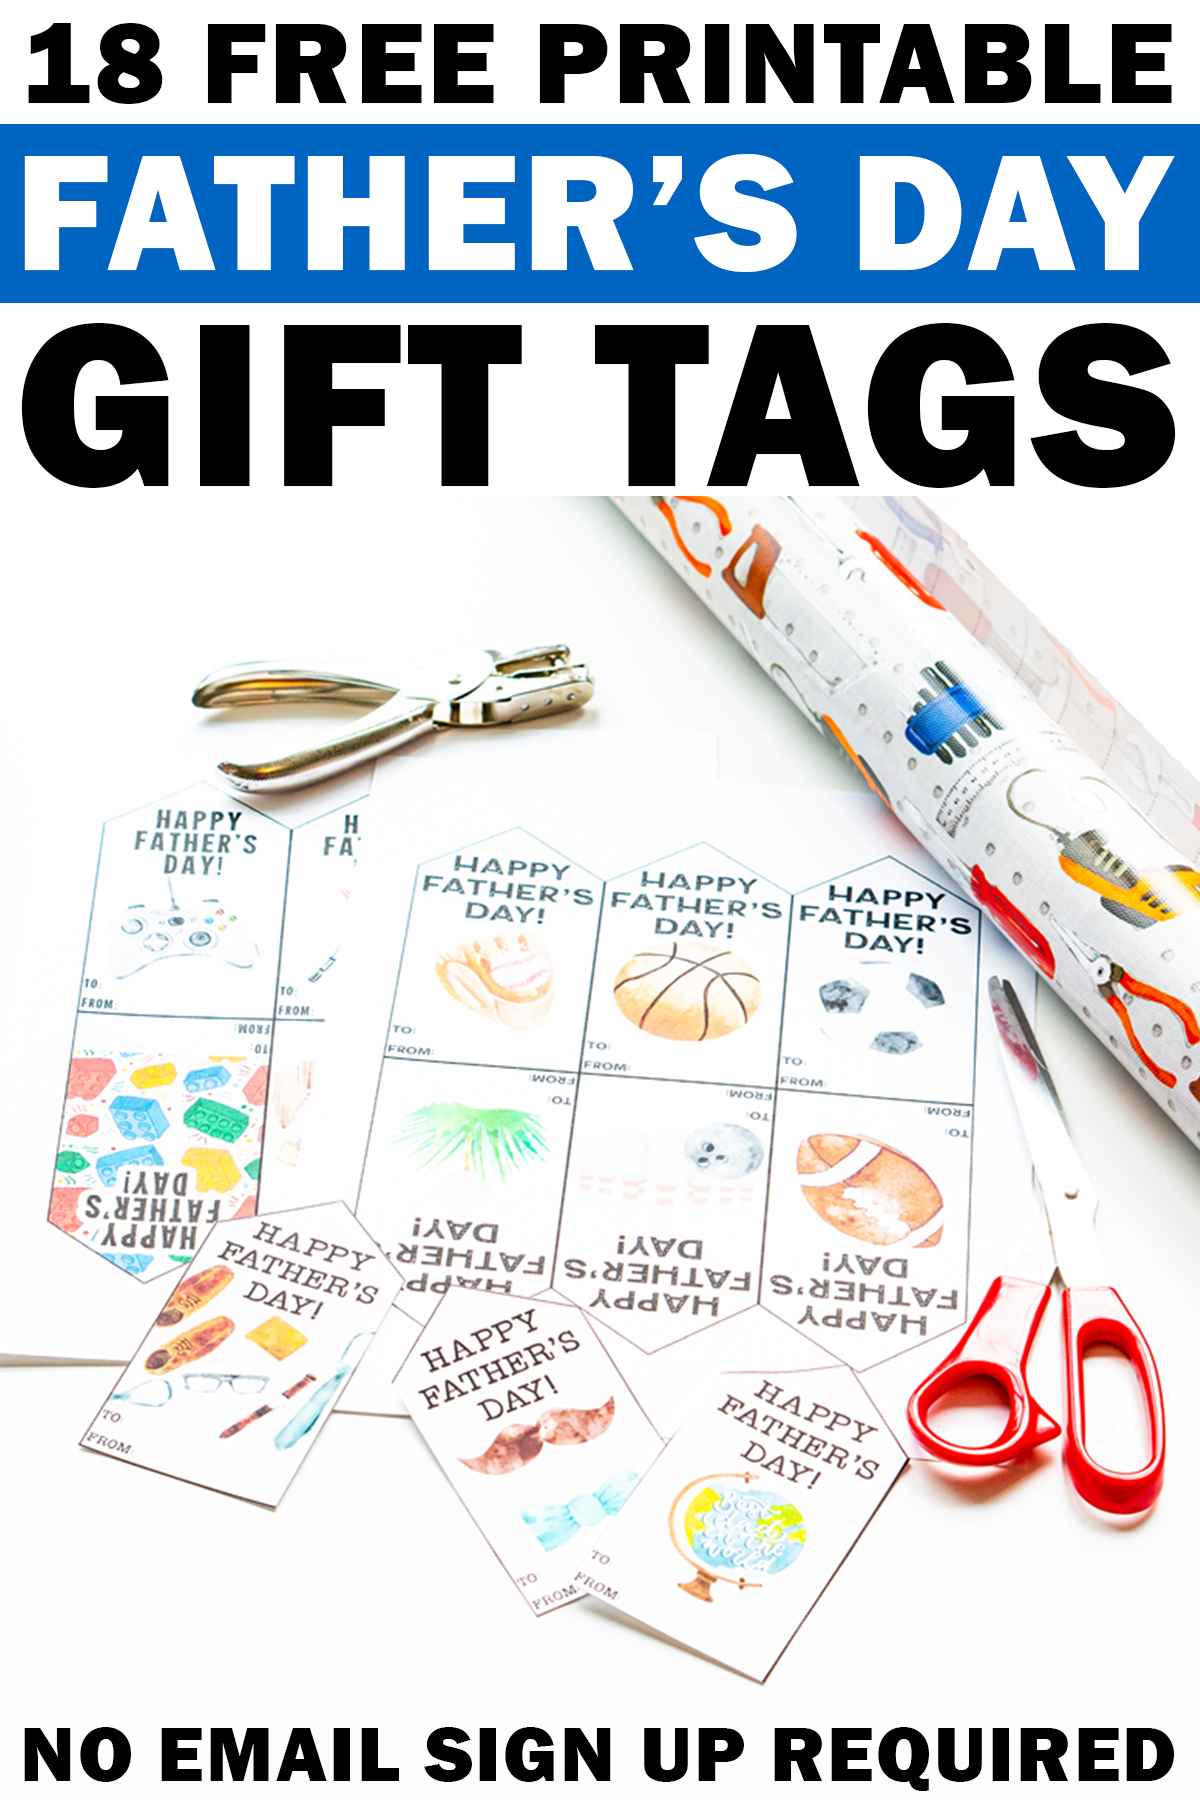 At the top it says 18 Free printable Father's Day gift tags. At the bottom it says no email sign up required. The image in the middle shows some tool themed wrapping paper, a hole punch, scissors, and some Happy Fathers Day tags printables you can get for free at the end of this post.